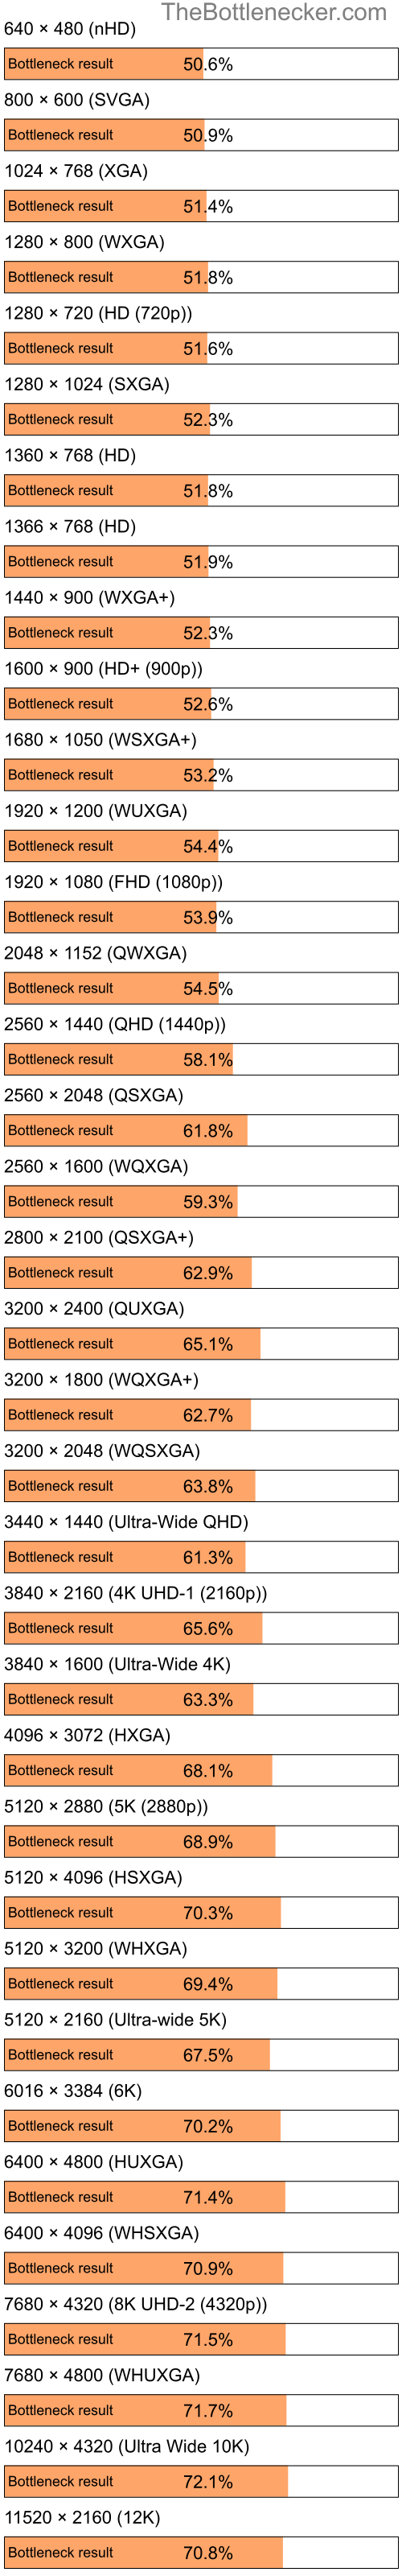 Bottleneck results by resolution for Intel Pentium 4 and AMD Radeon HD 4270 in Processor Intense Tasks